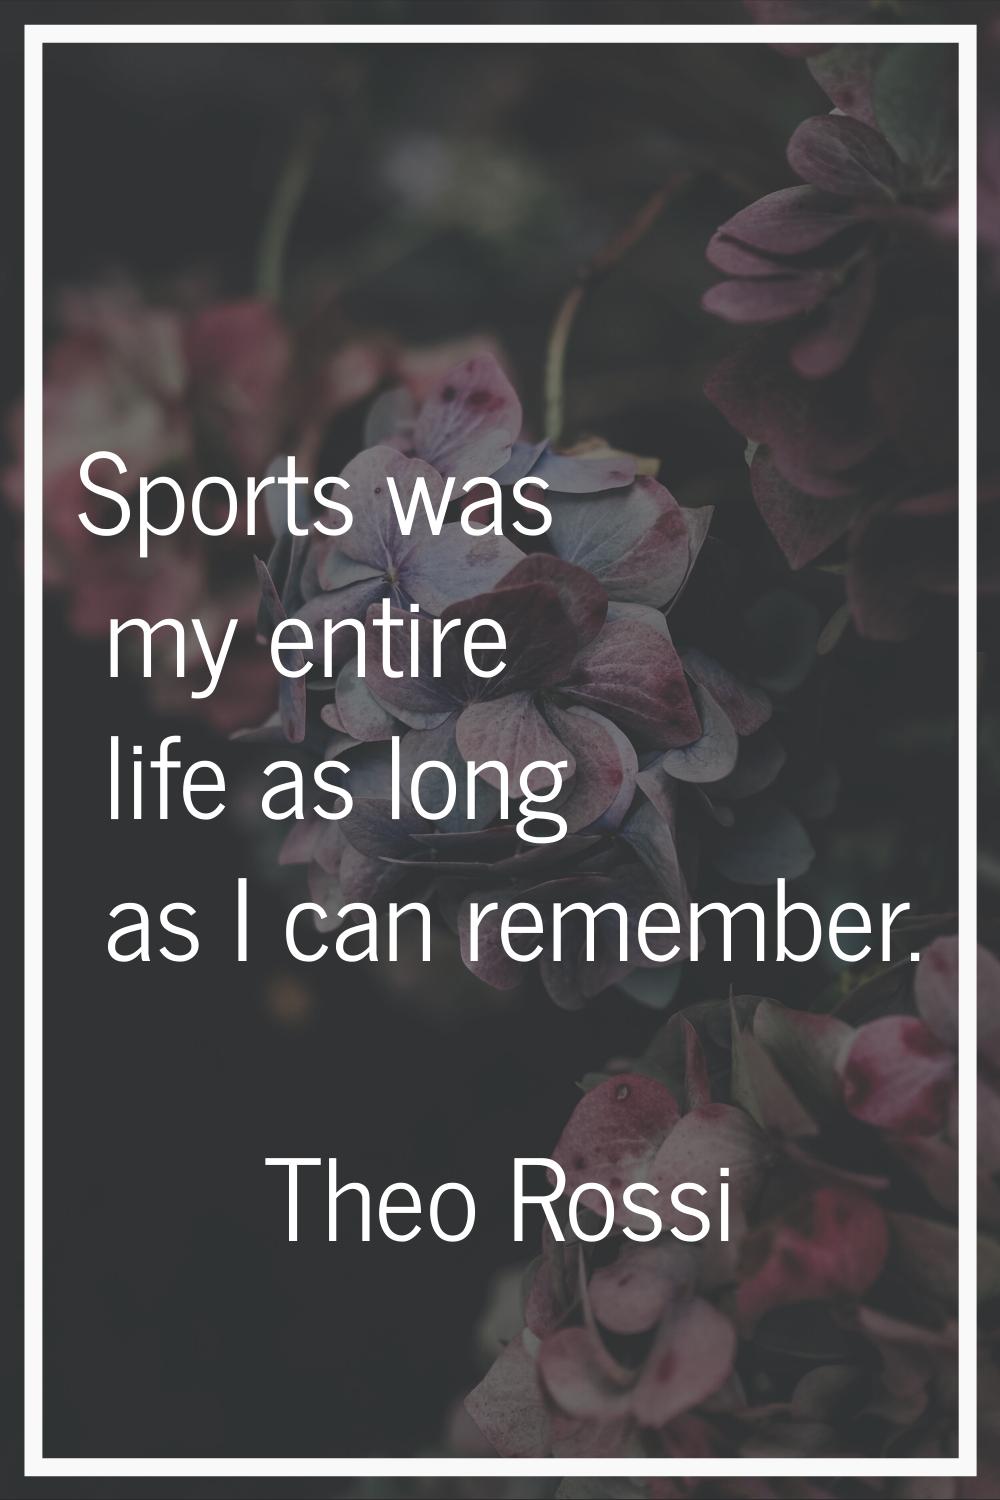 Sports was my entire life as long as I can remember.